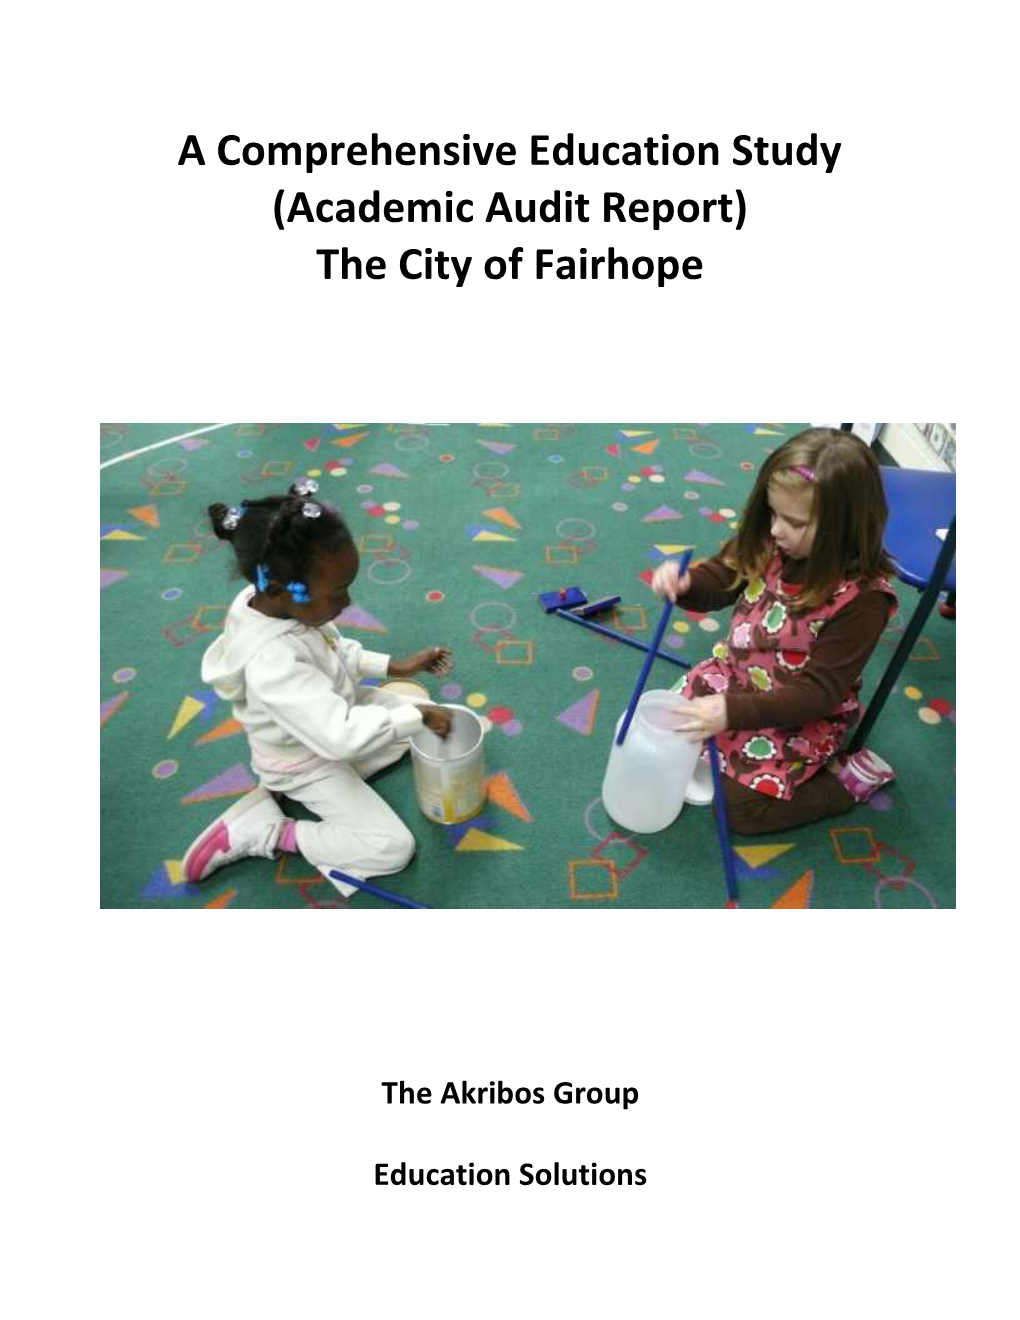 A Comprehensive Education Study (Academic Audit Report) the City of Fairhope